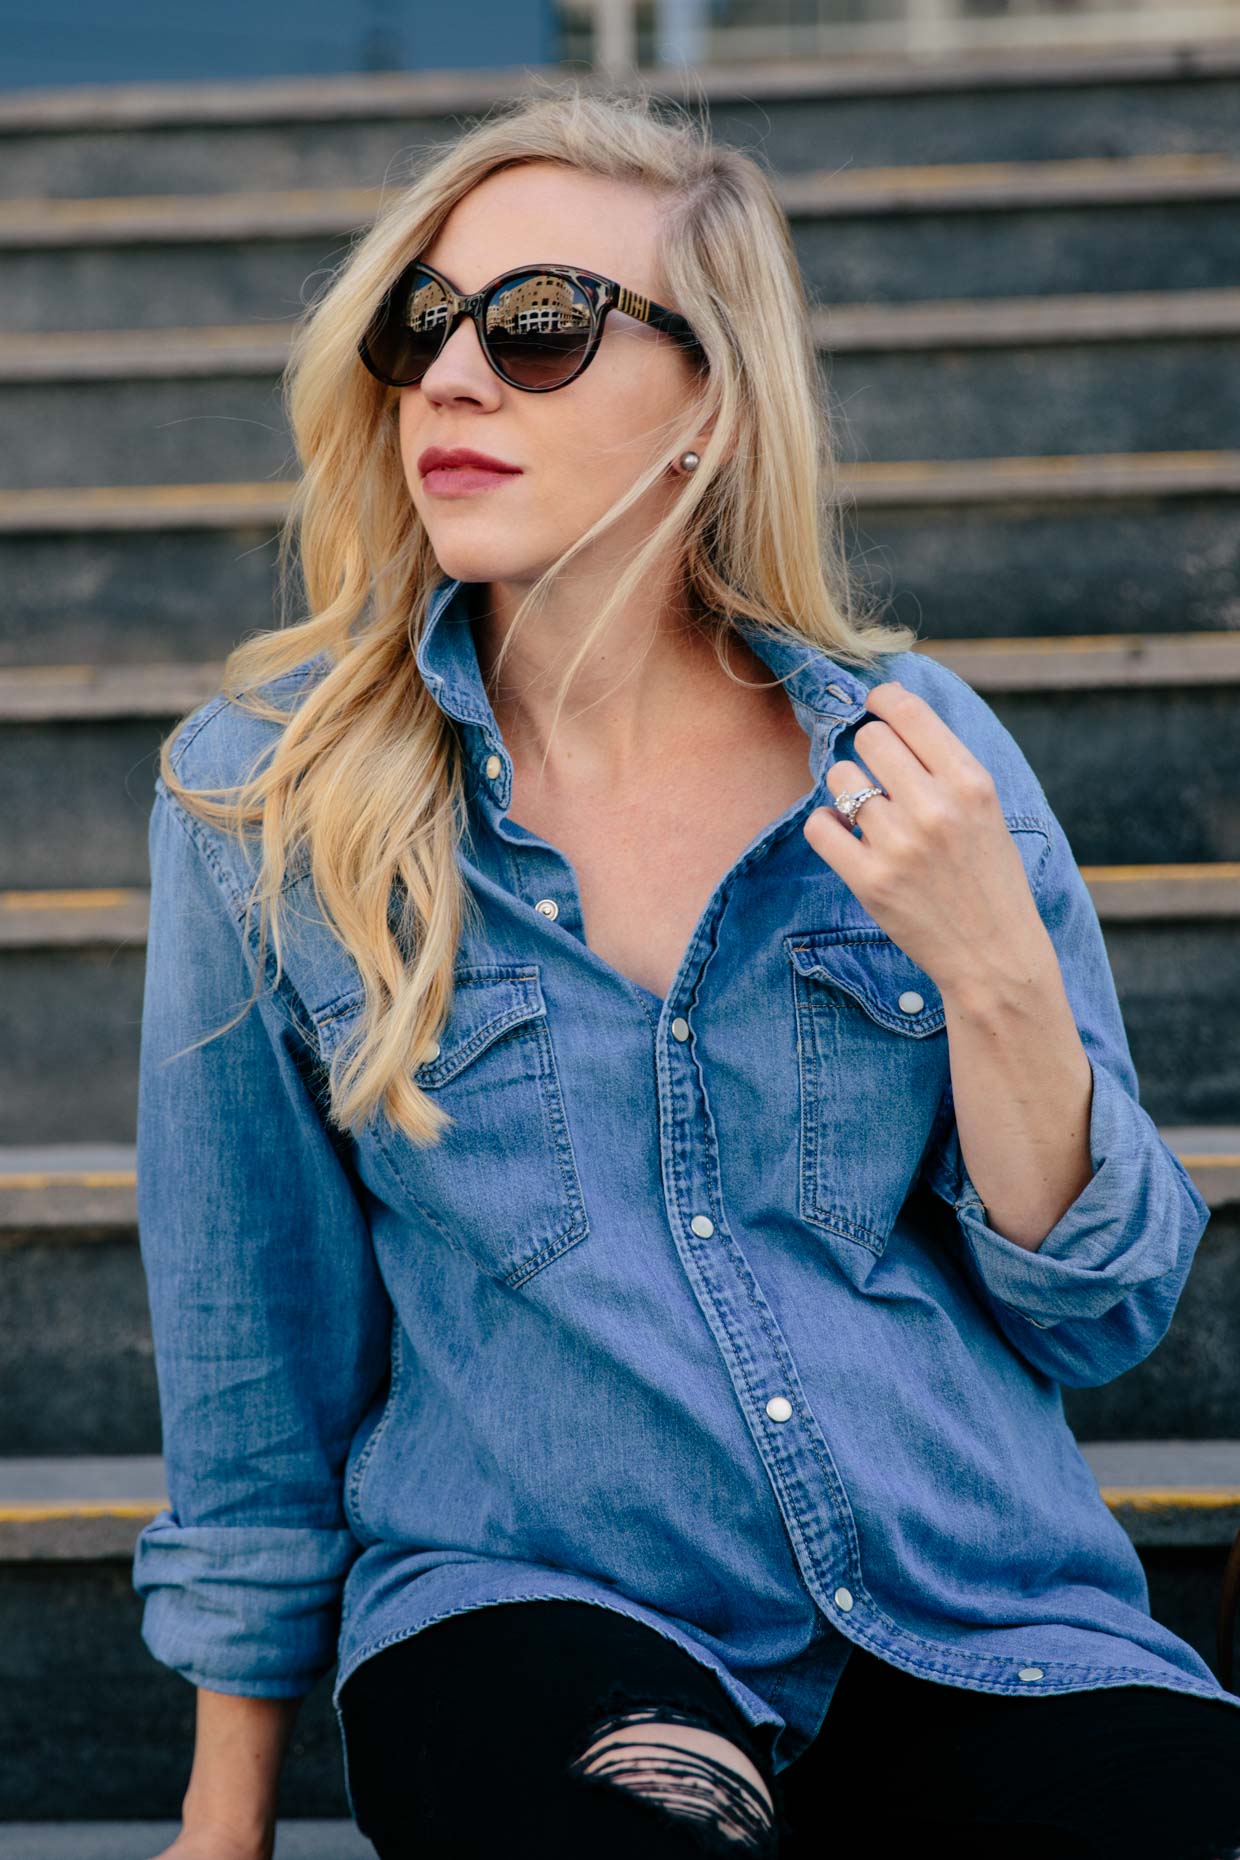 Western Meets Edgy: Oversized Denim Shirt with Black Jeans & Suede Boots -  Meagan's Moda